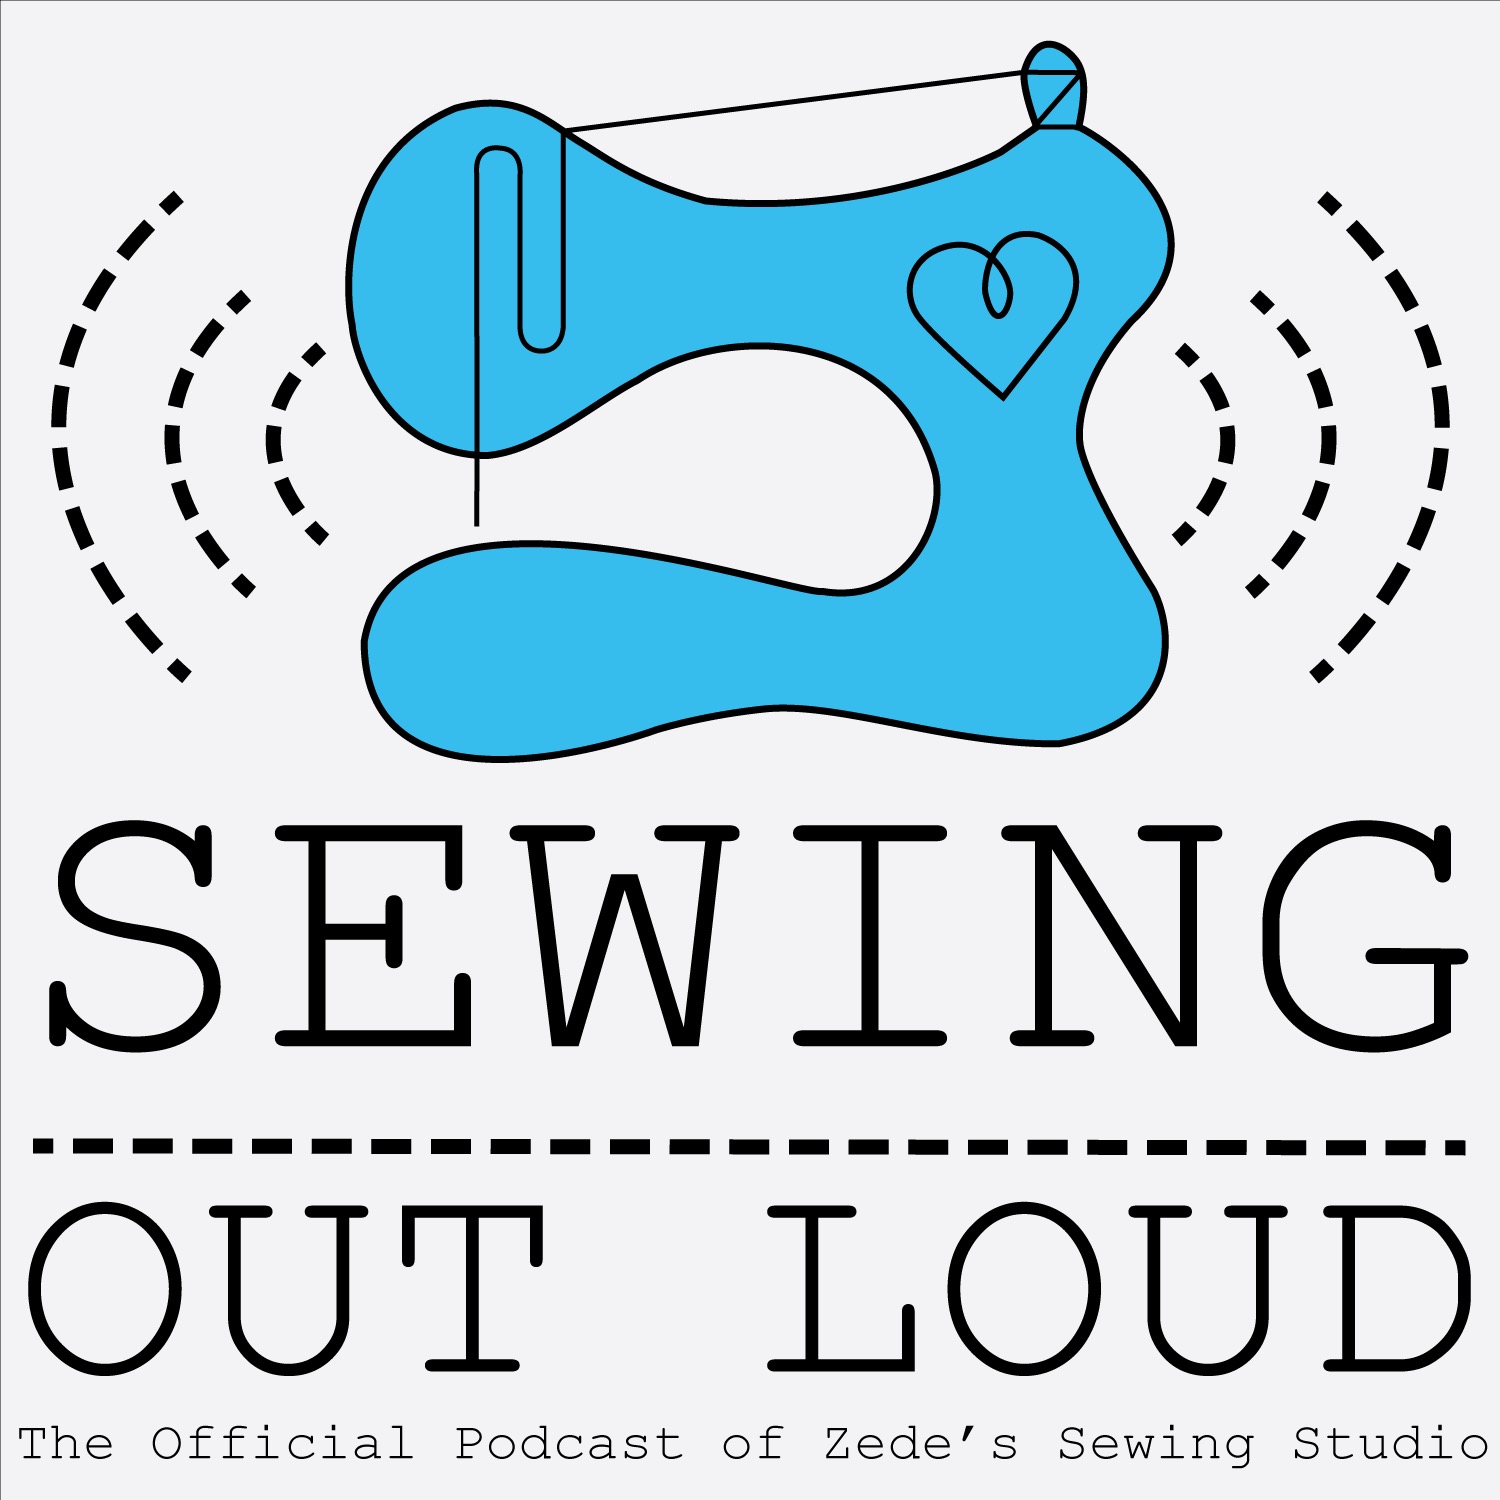 What We've Been Sewing - September 2021